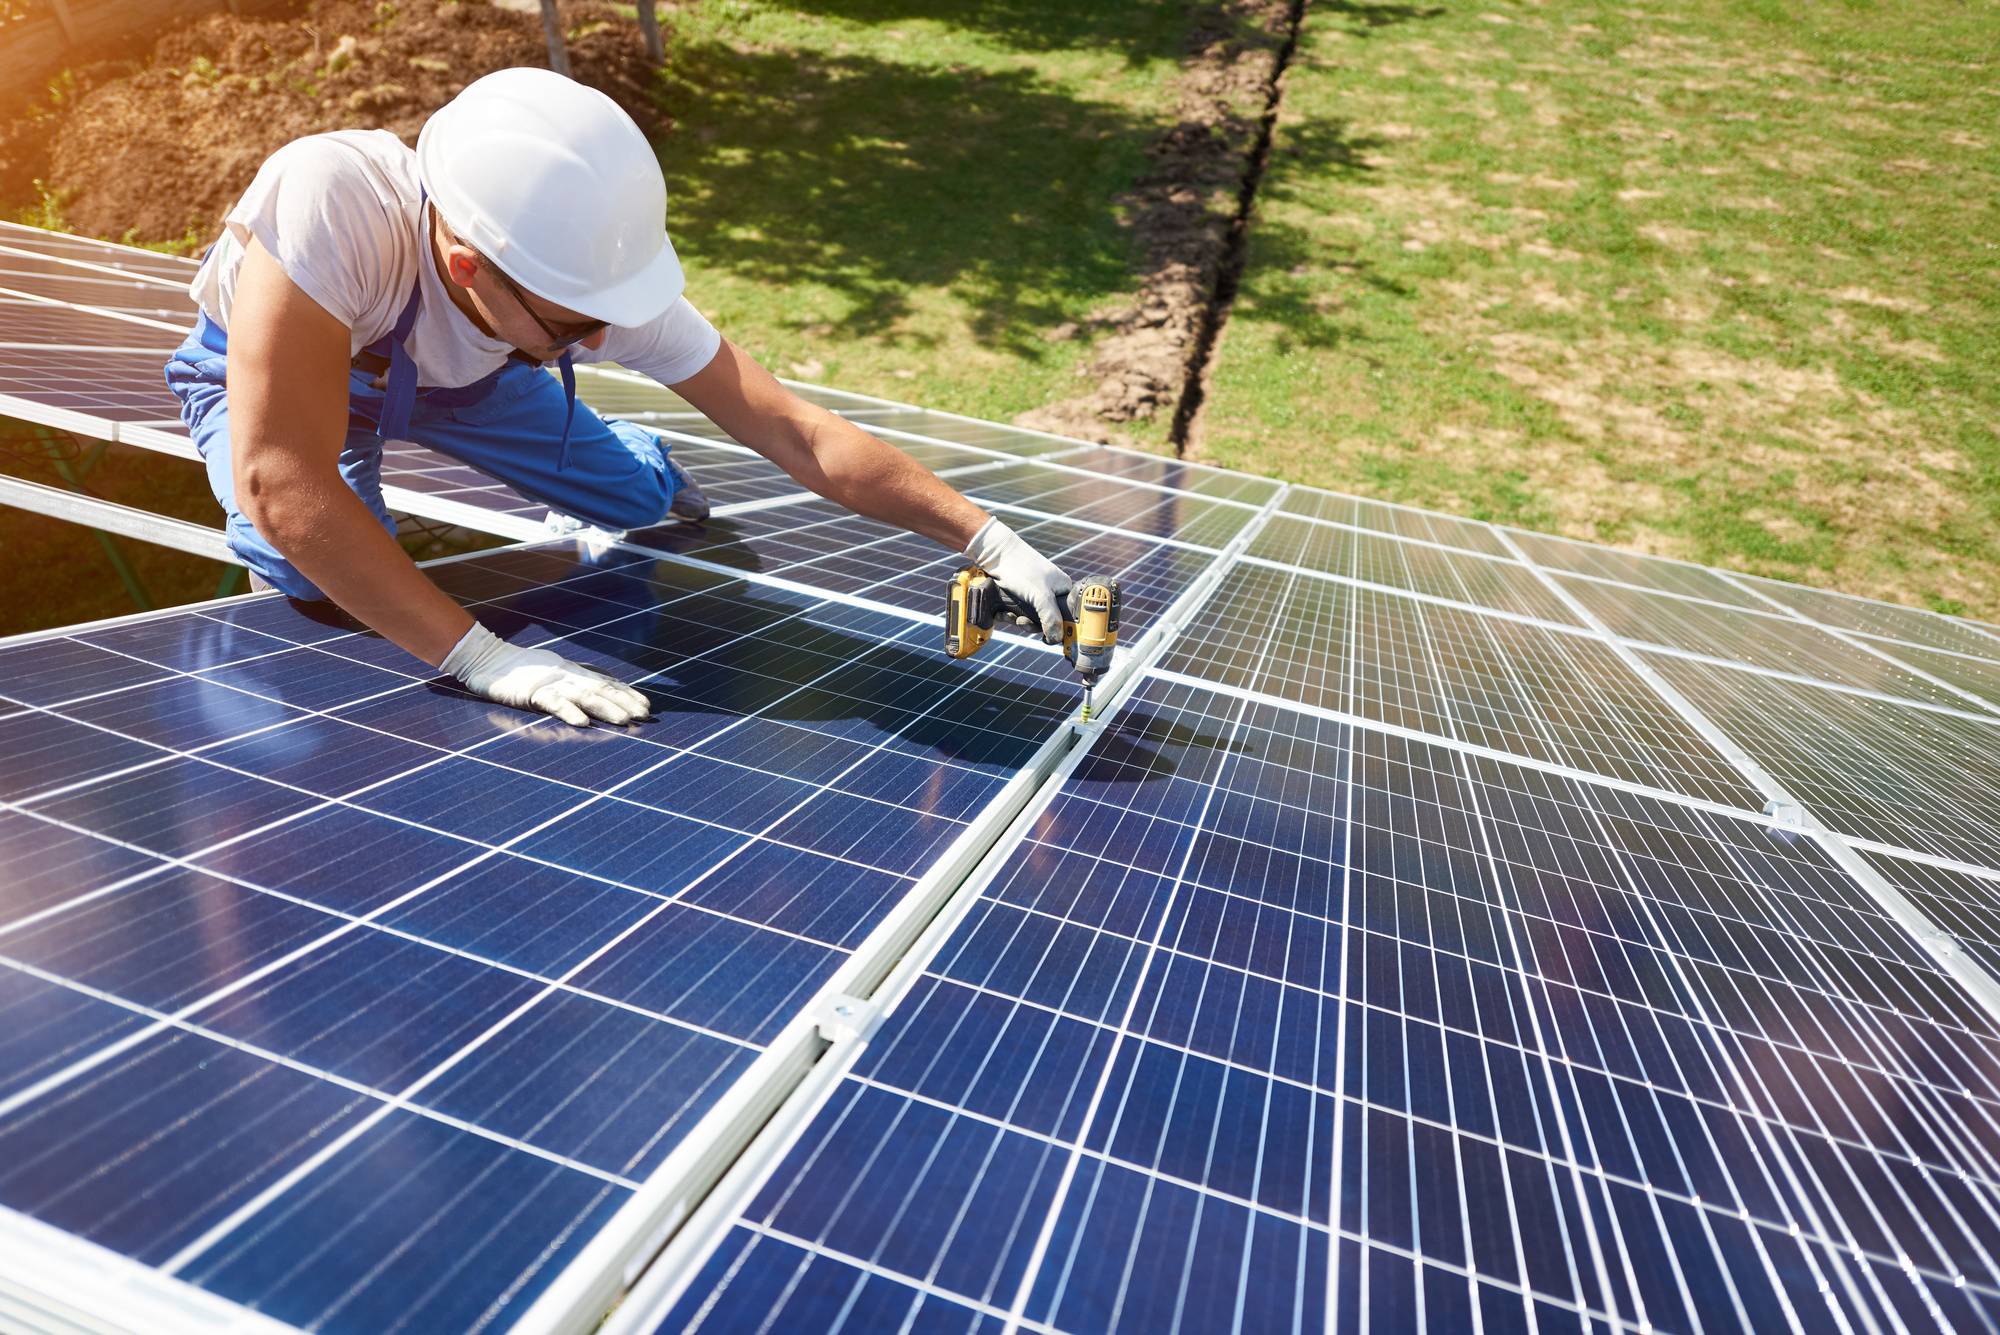 The Best Commercial Roofing For Solar Panel Installation